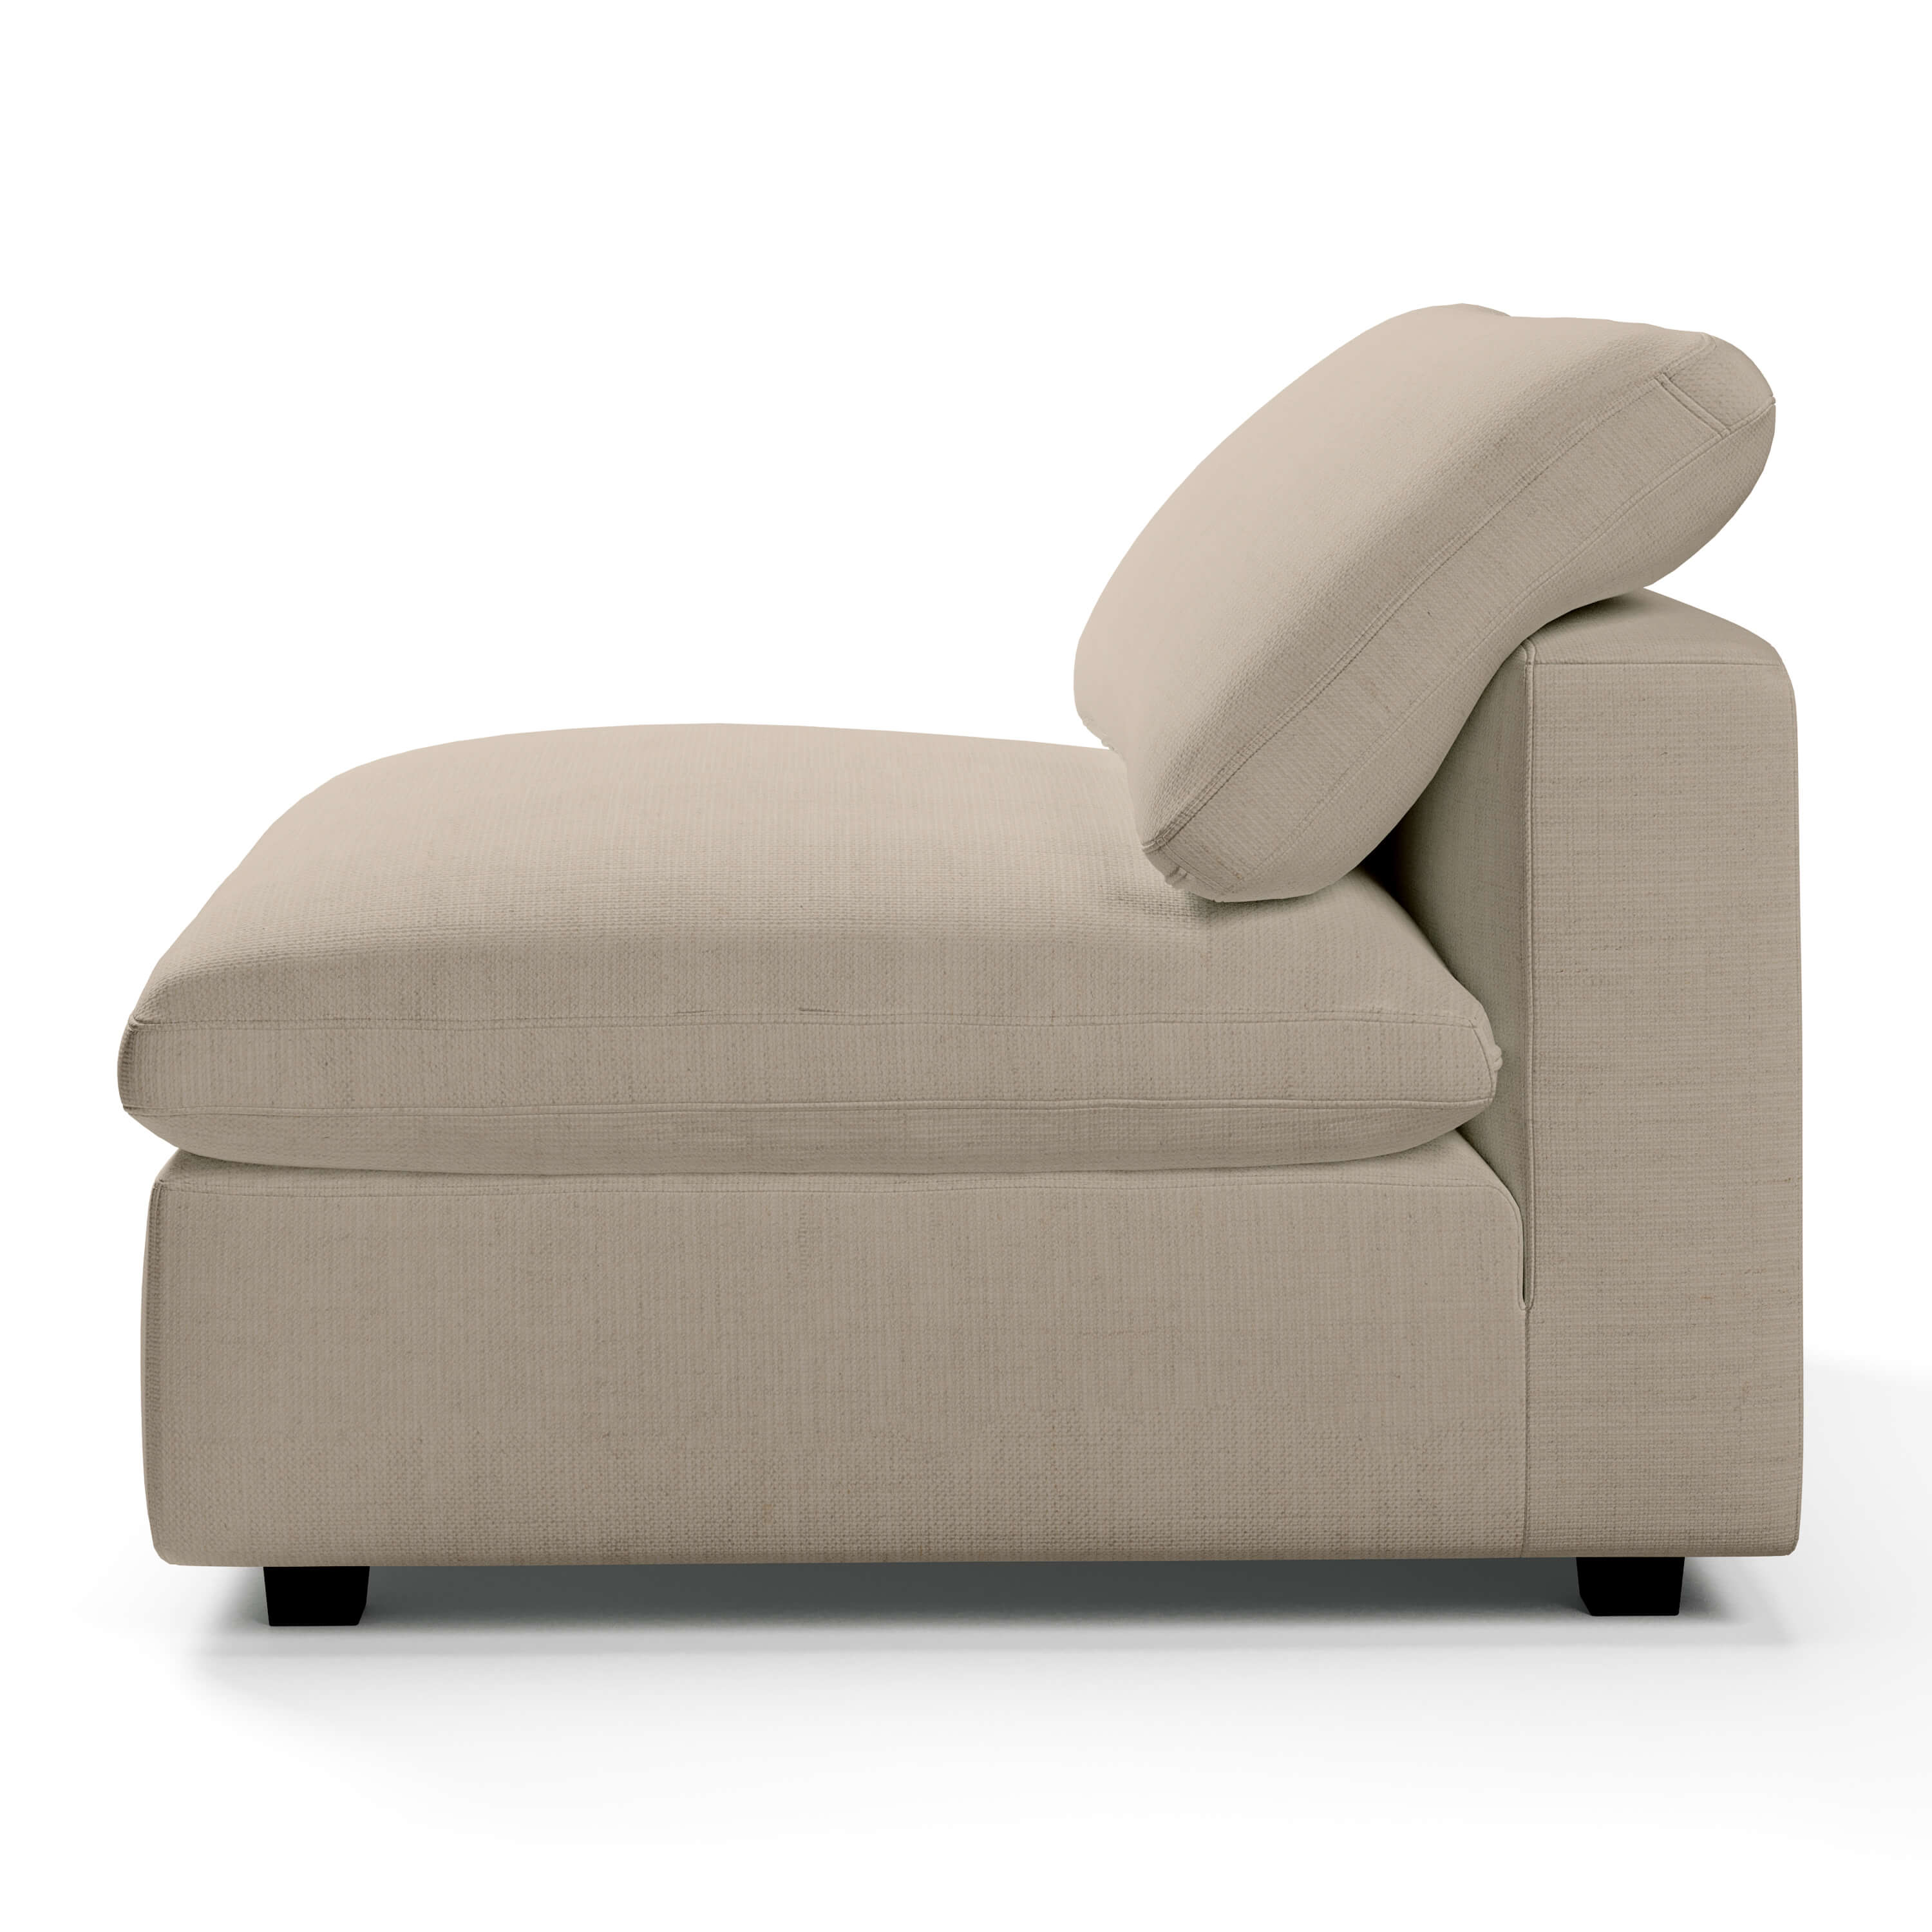 Comfy Armless Chair | Comfortable Armless Chair | Couch Haus